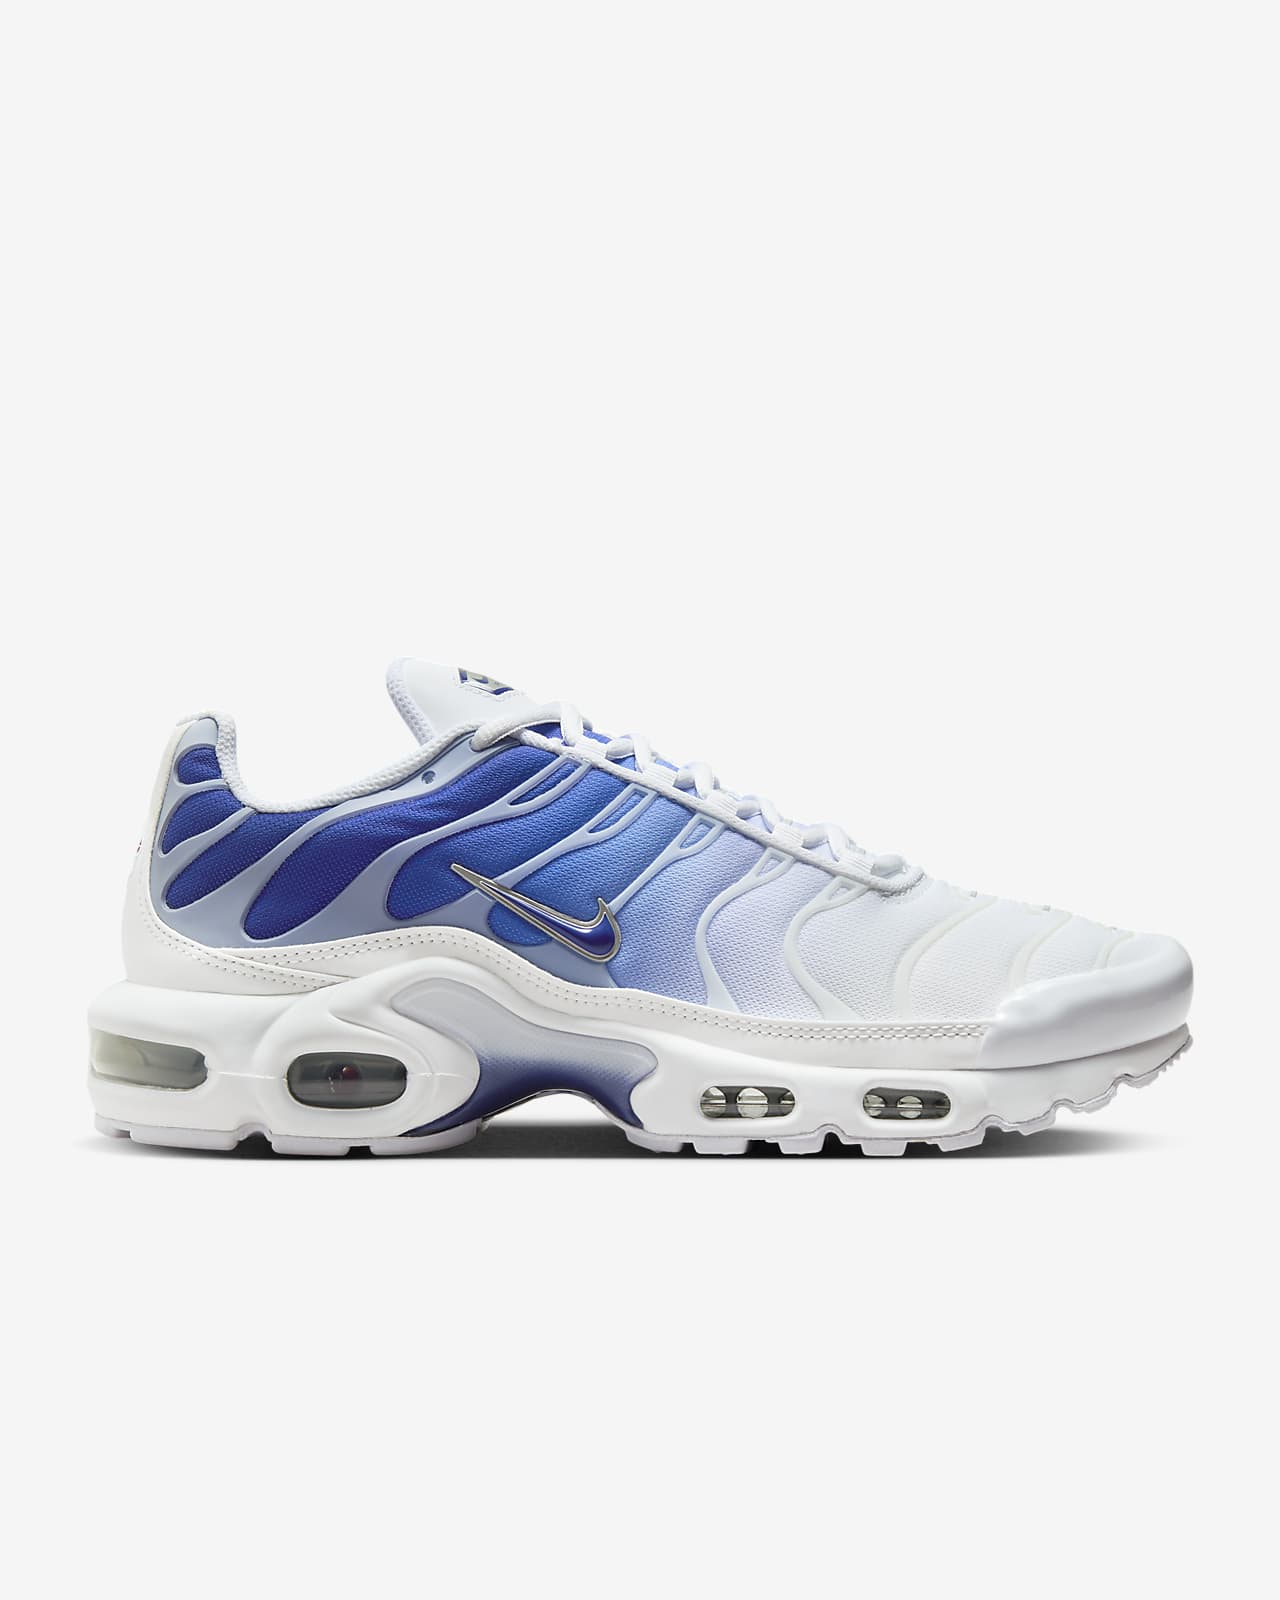 Buy Air Max Plus Shoes: New Releases & Iconic Styles